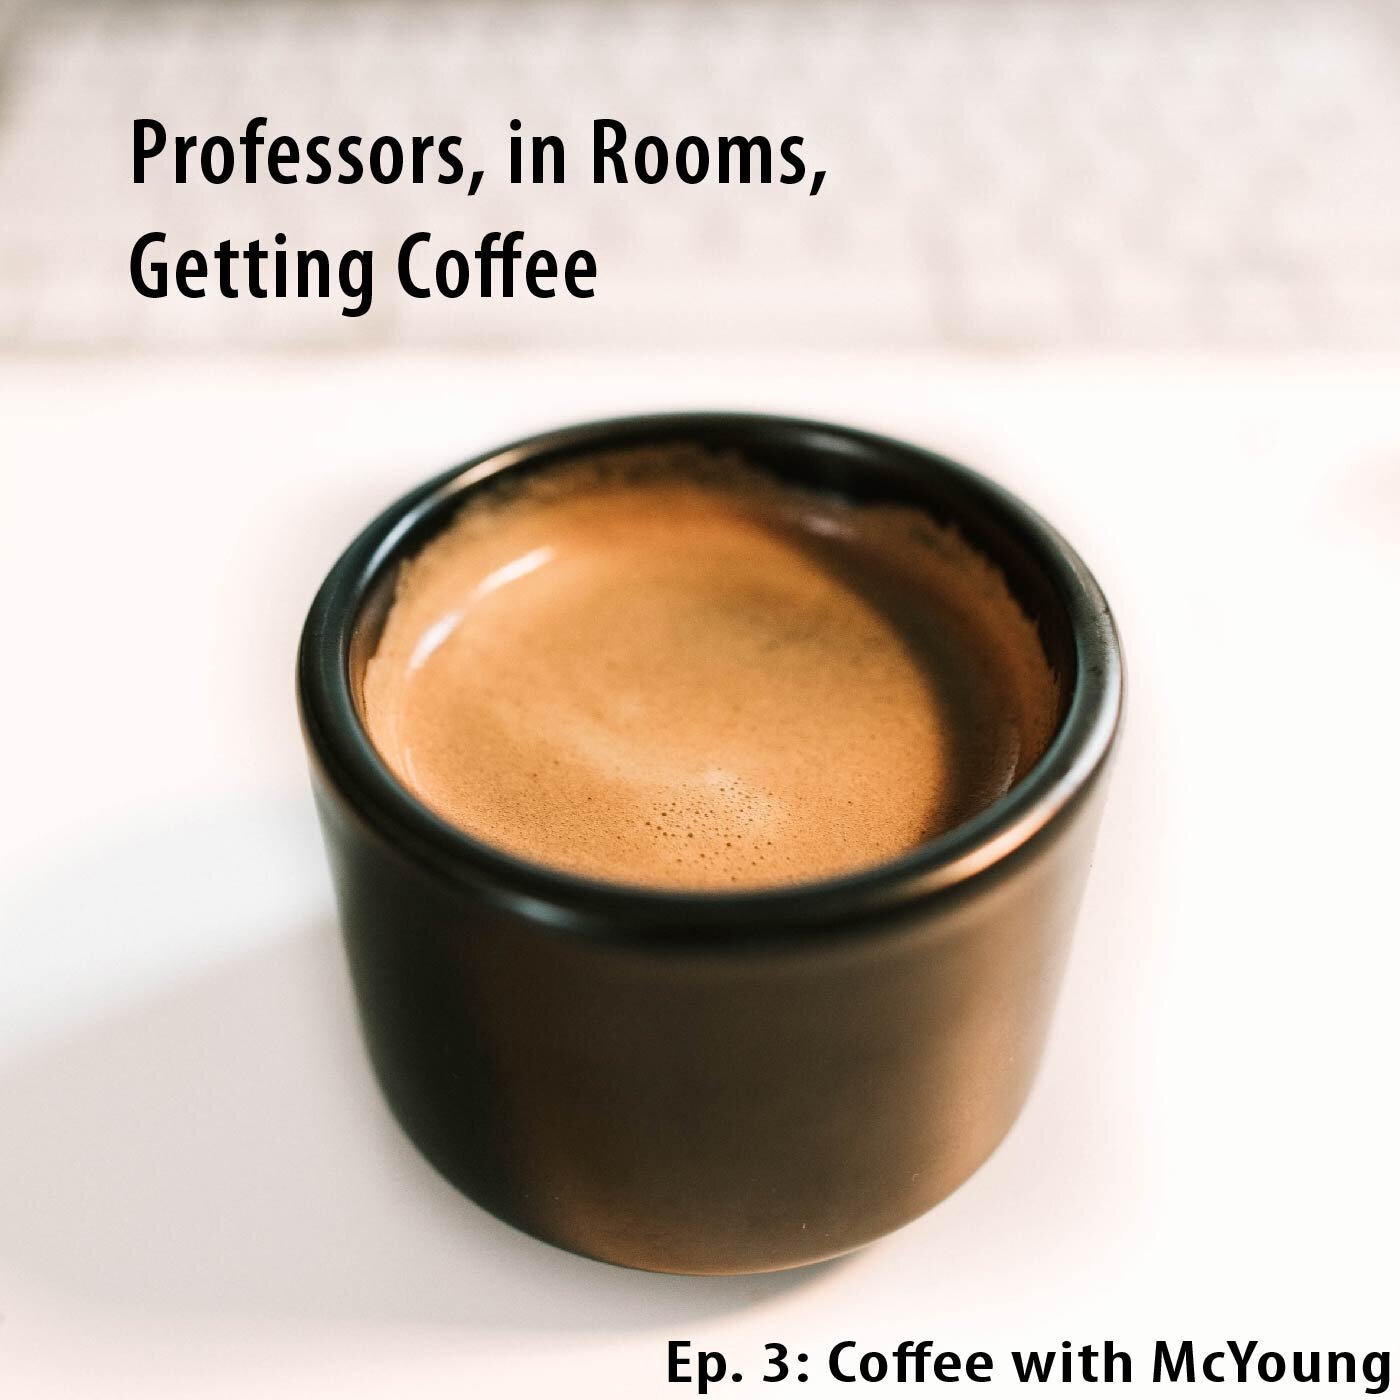 Coffee with McYoung